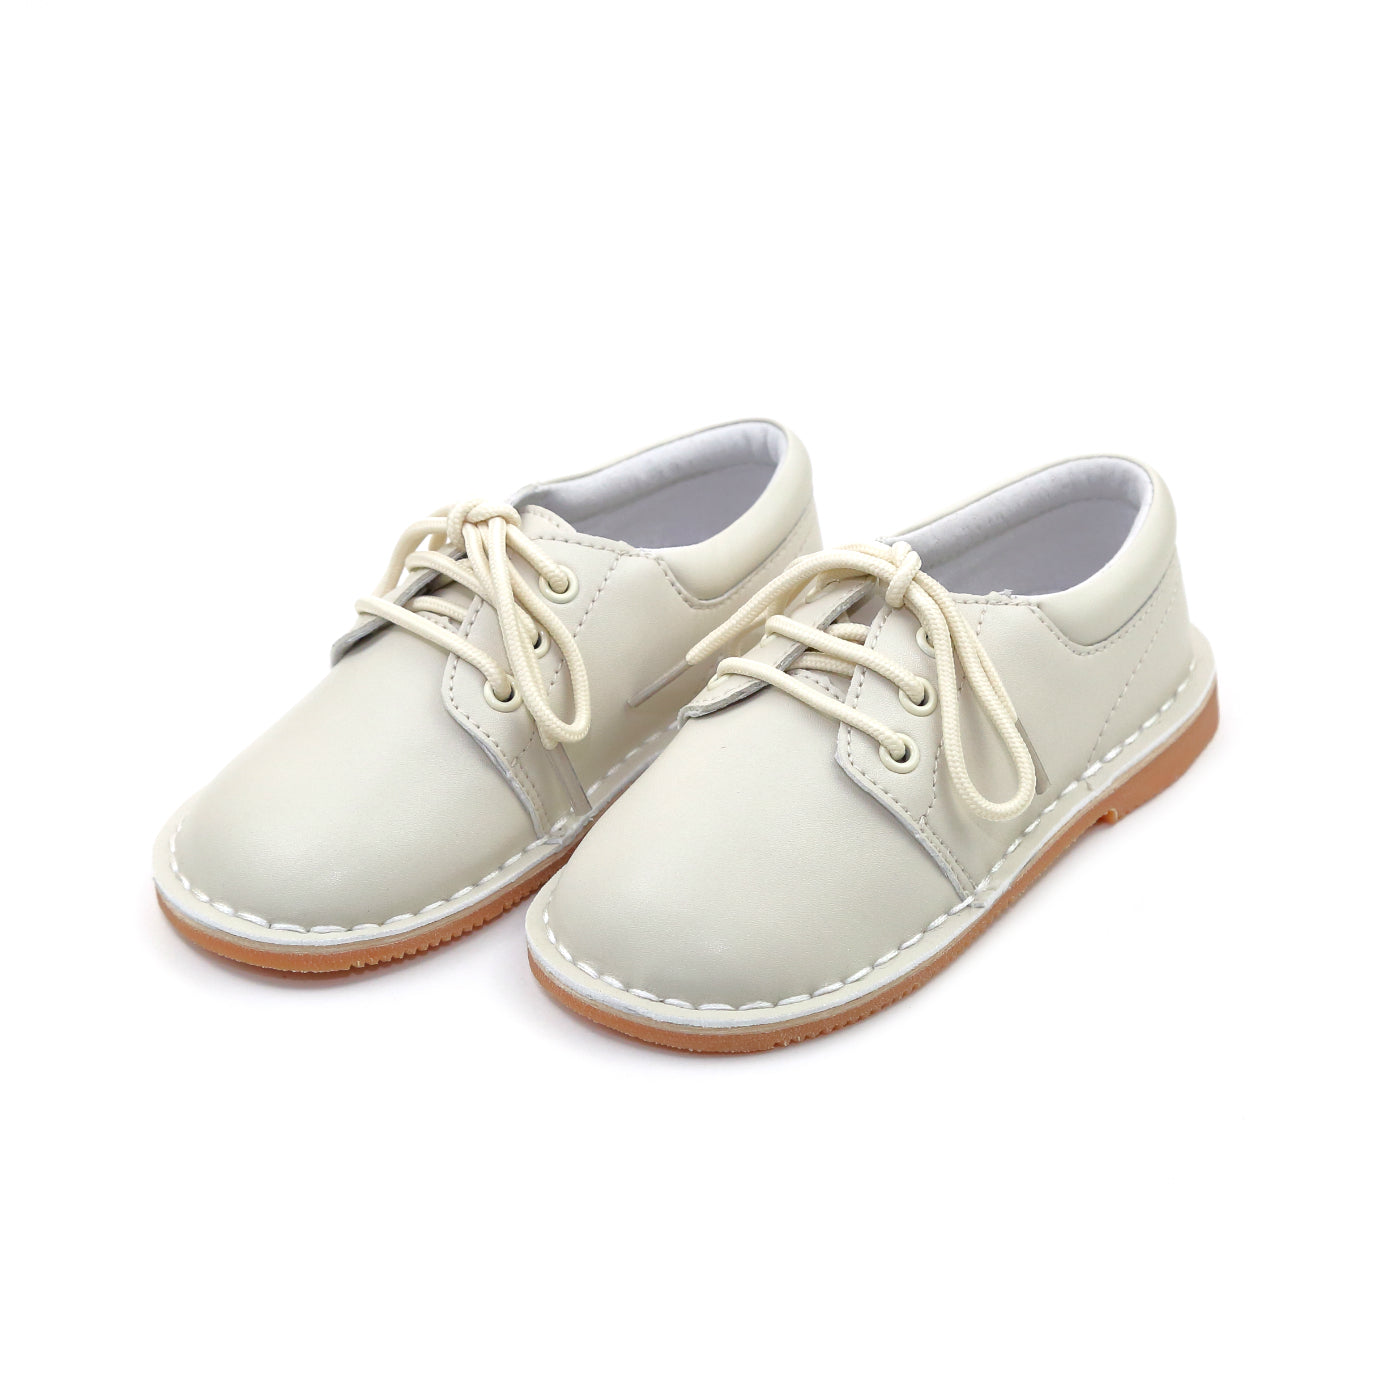 Tyler is a beautiful lace up shoe finely crafted from smooth leather, with functional matching lace front and stitch down construction. An absolutely handsome shoe for boys, this is our favorite shoe of choice for school, casual and dressy occasions.  Smooth leather upper Matching laces Stitch down construction Breathable leather lining